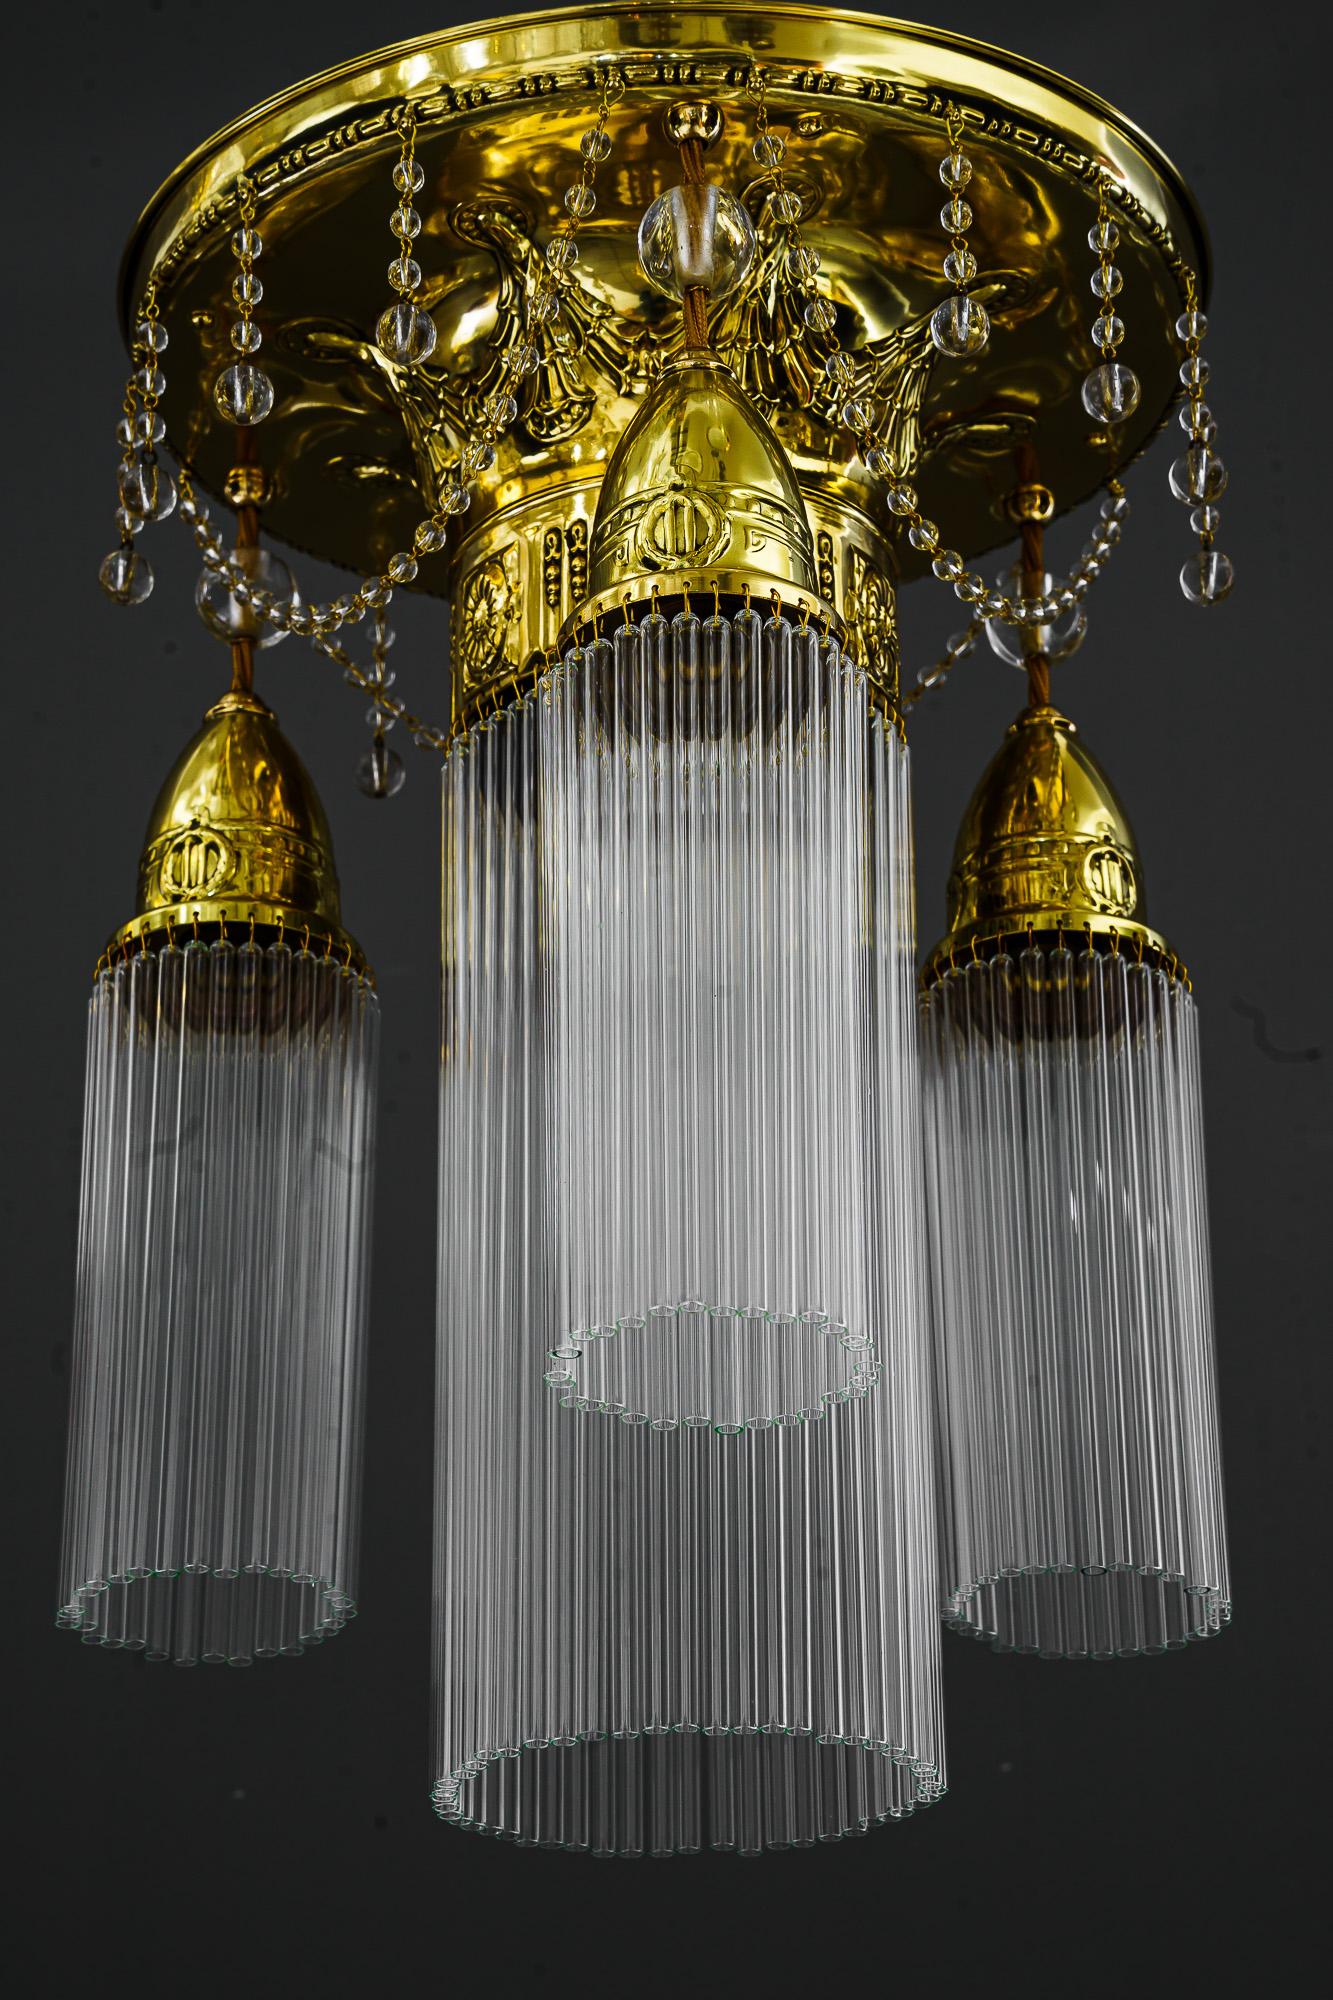 Jugendstil ceiling lamp vienna around 1908
Brass polished and stove enameled
the glass sticks are replaced ( new )